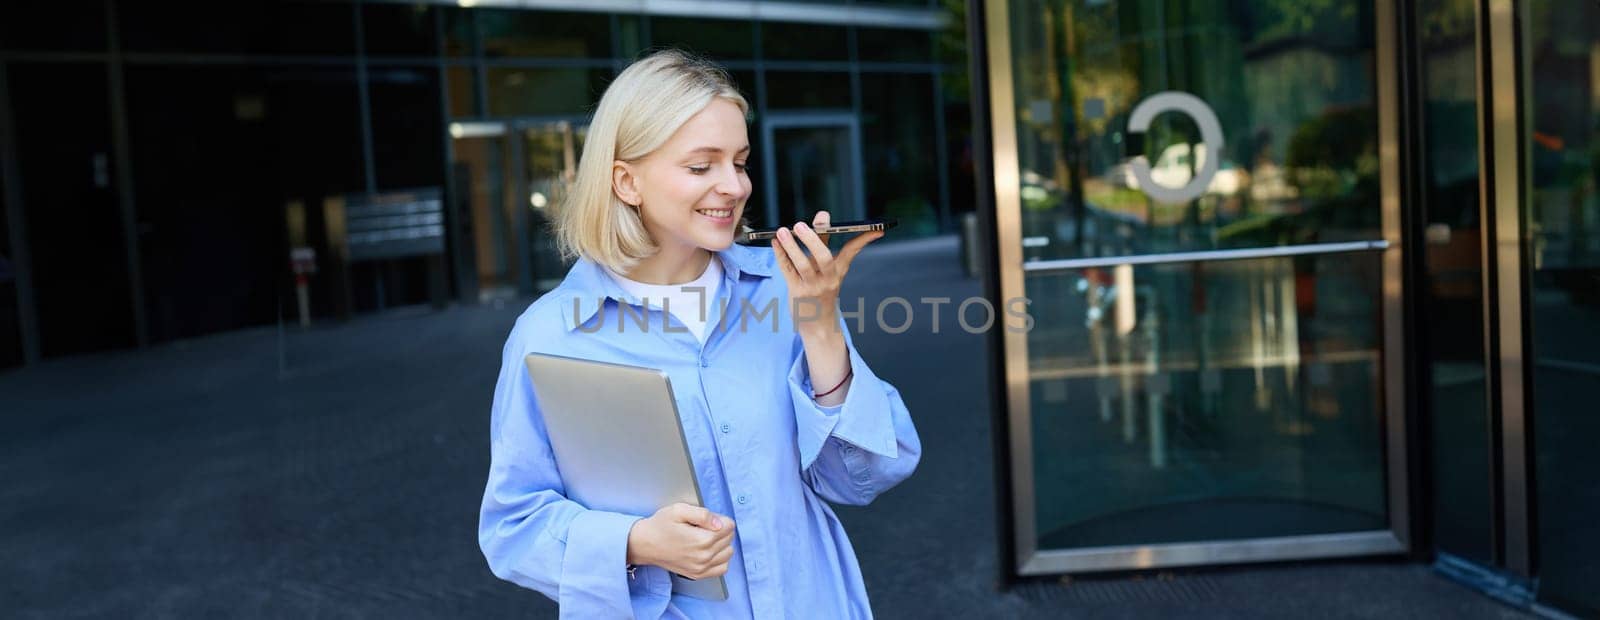 Image of smiling beautiful blond girl, office employee with laptop, records voice message on smartphone app, standing near company building on street.